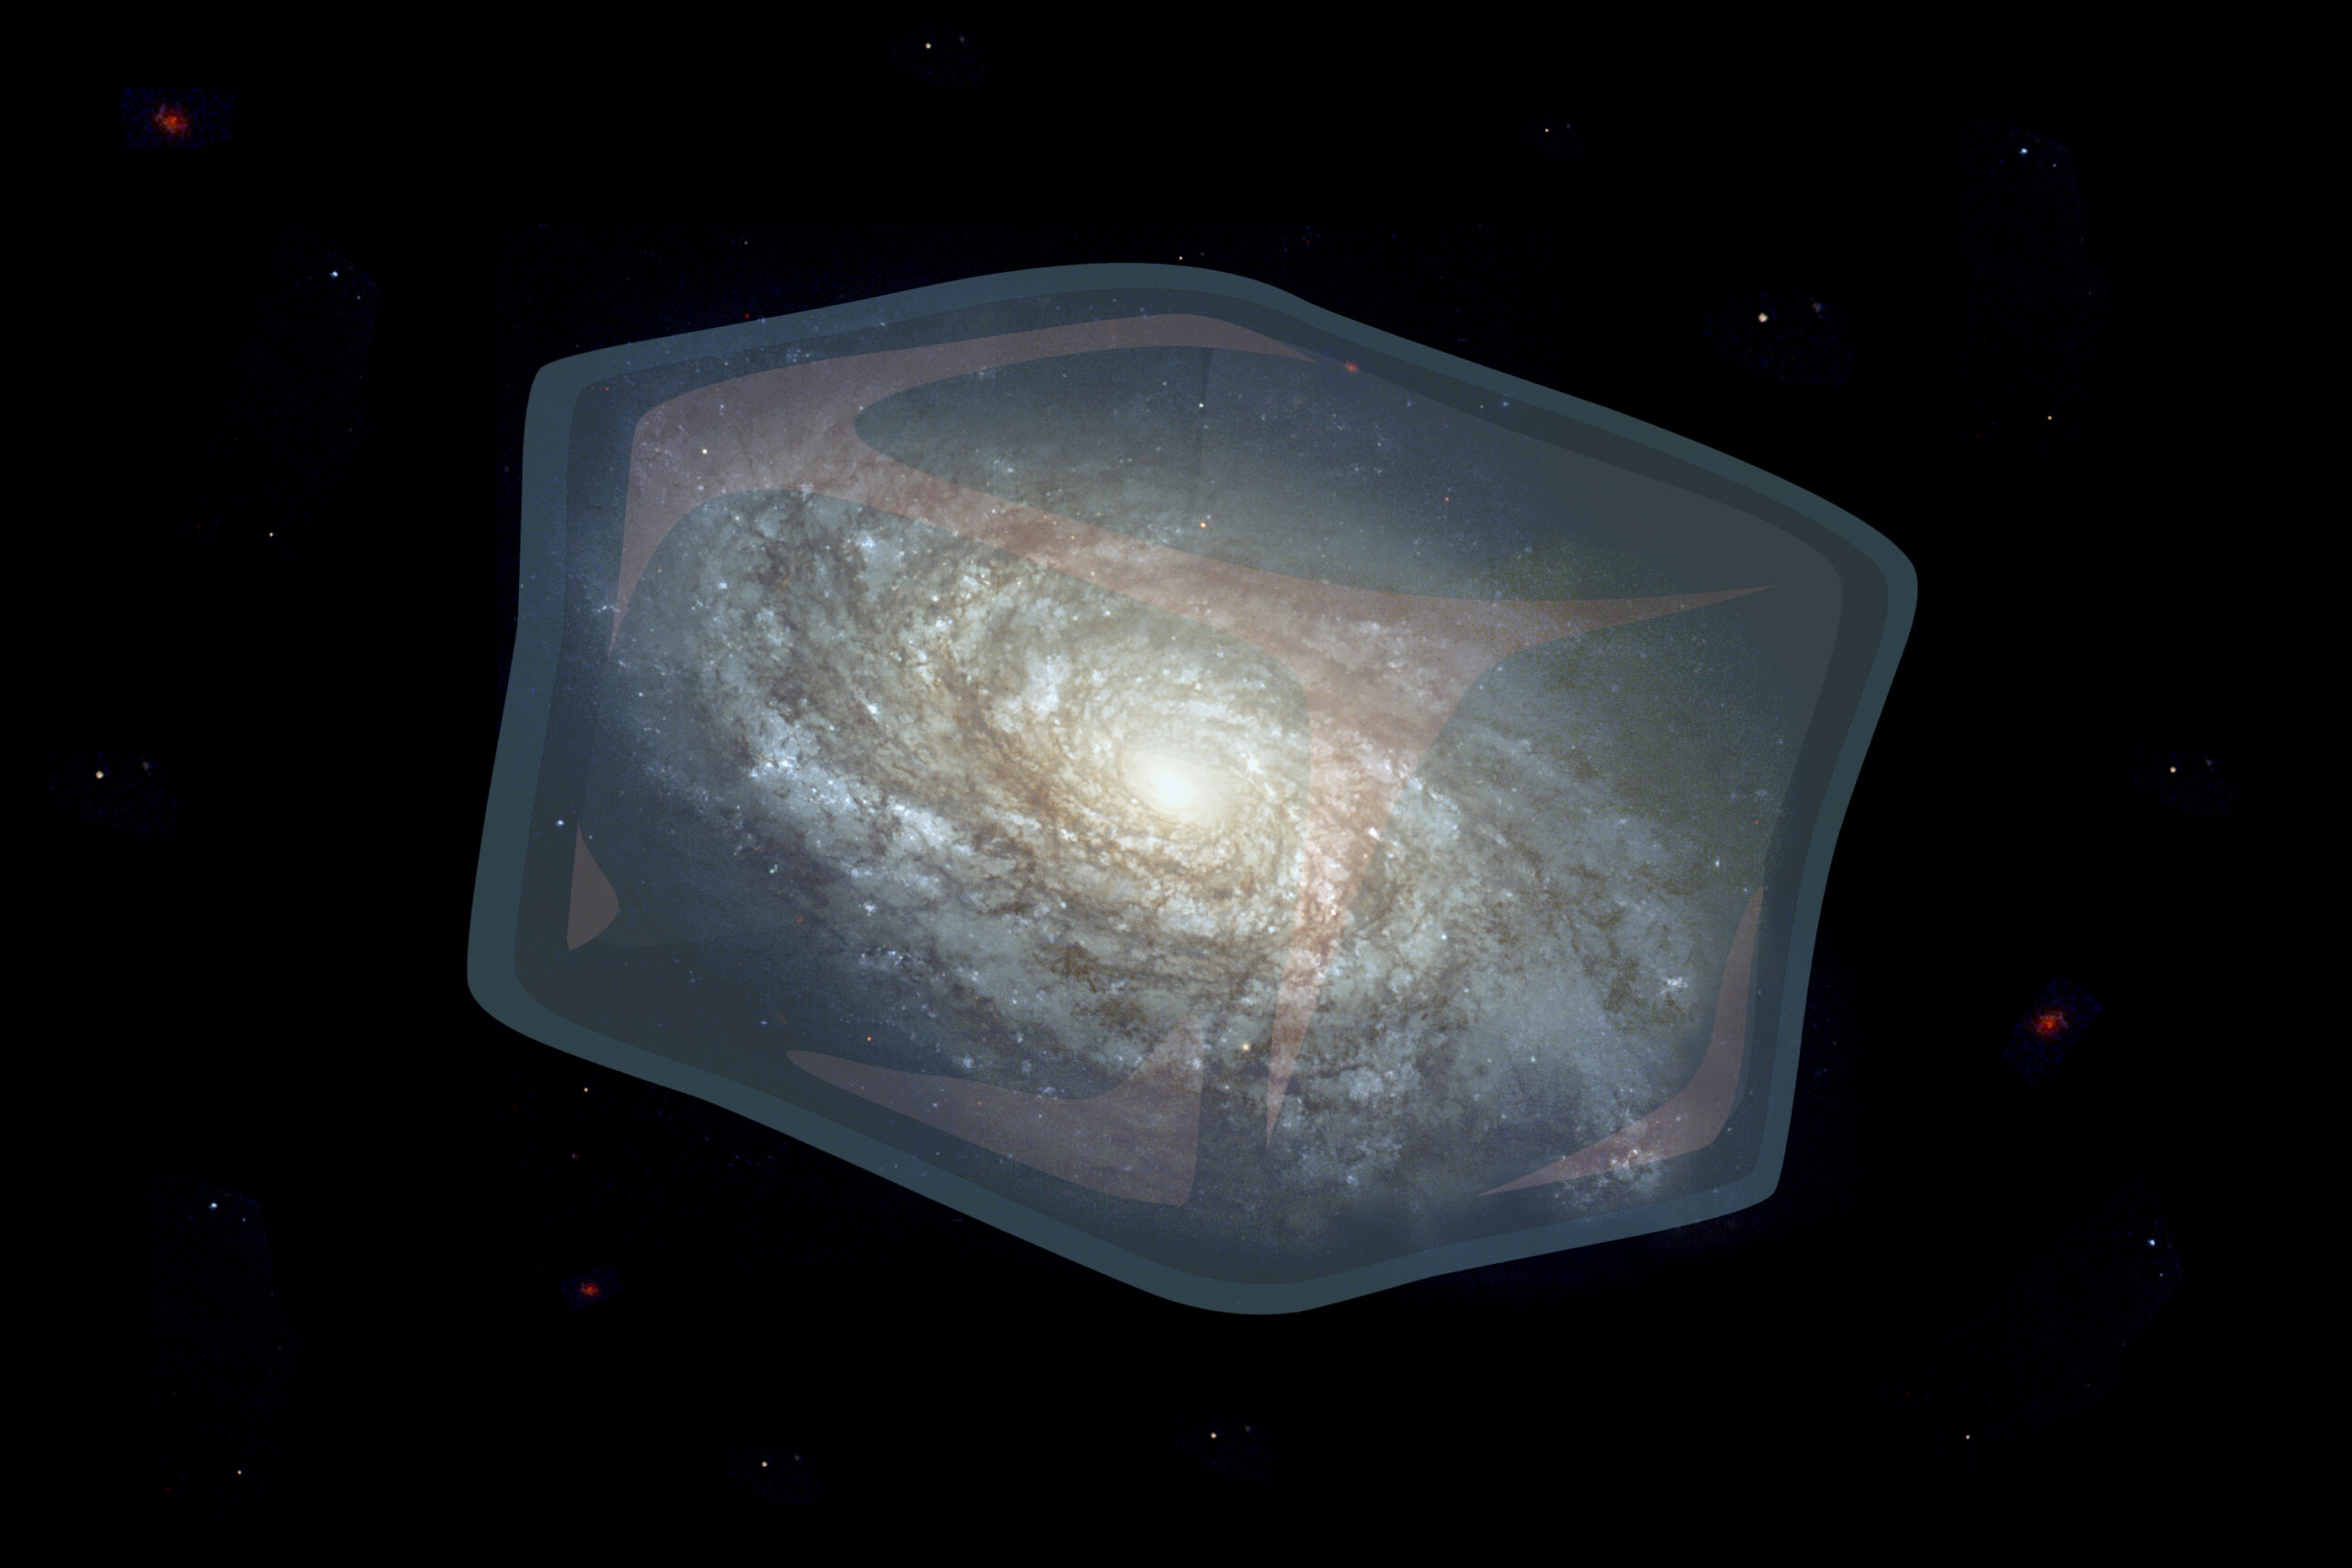 A photoshopped image shows a galaxy embedded in a giant block of ice